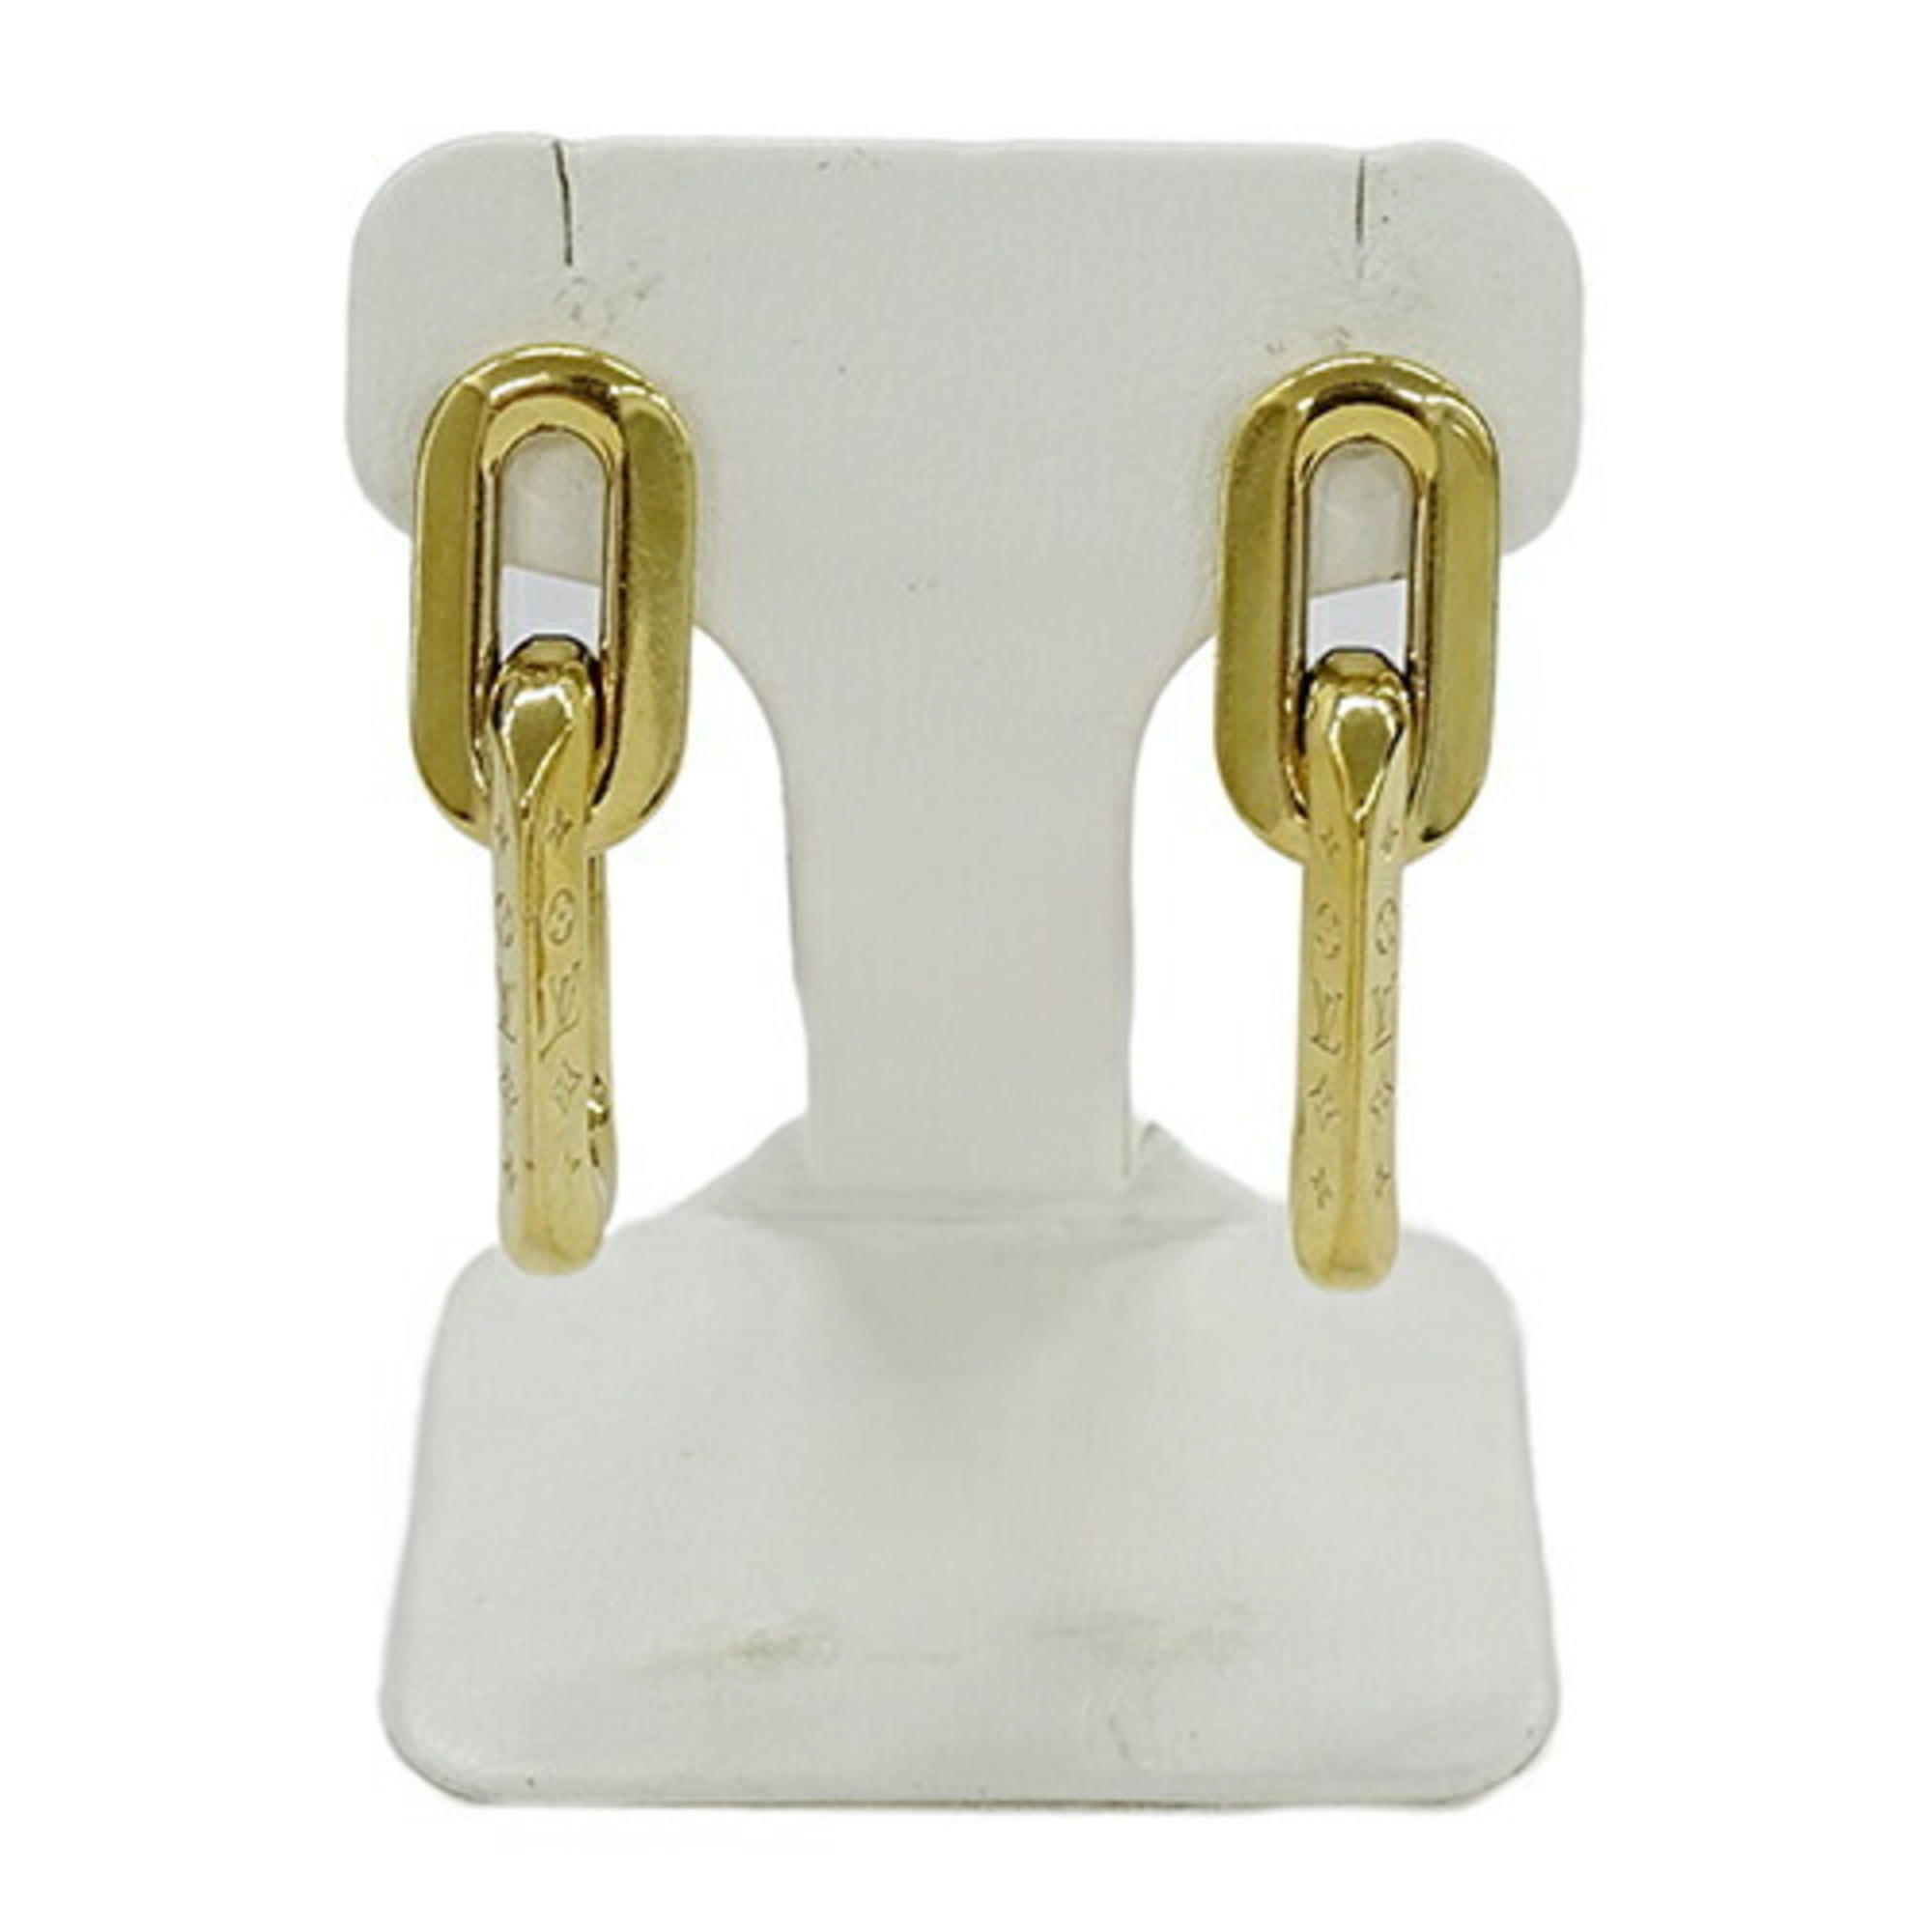 LOUIS VUITTON Earrings Women's Brand Boukdreuil Double 2 Maillon PM Gold MP2990 DP1201 For Both Ears